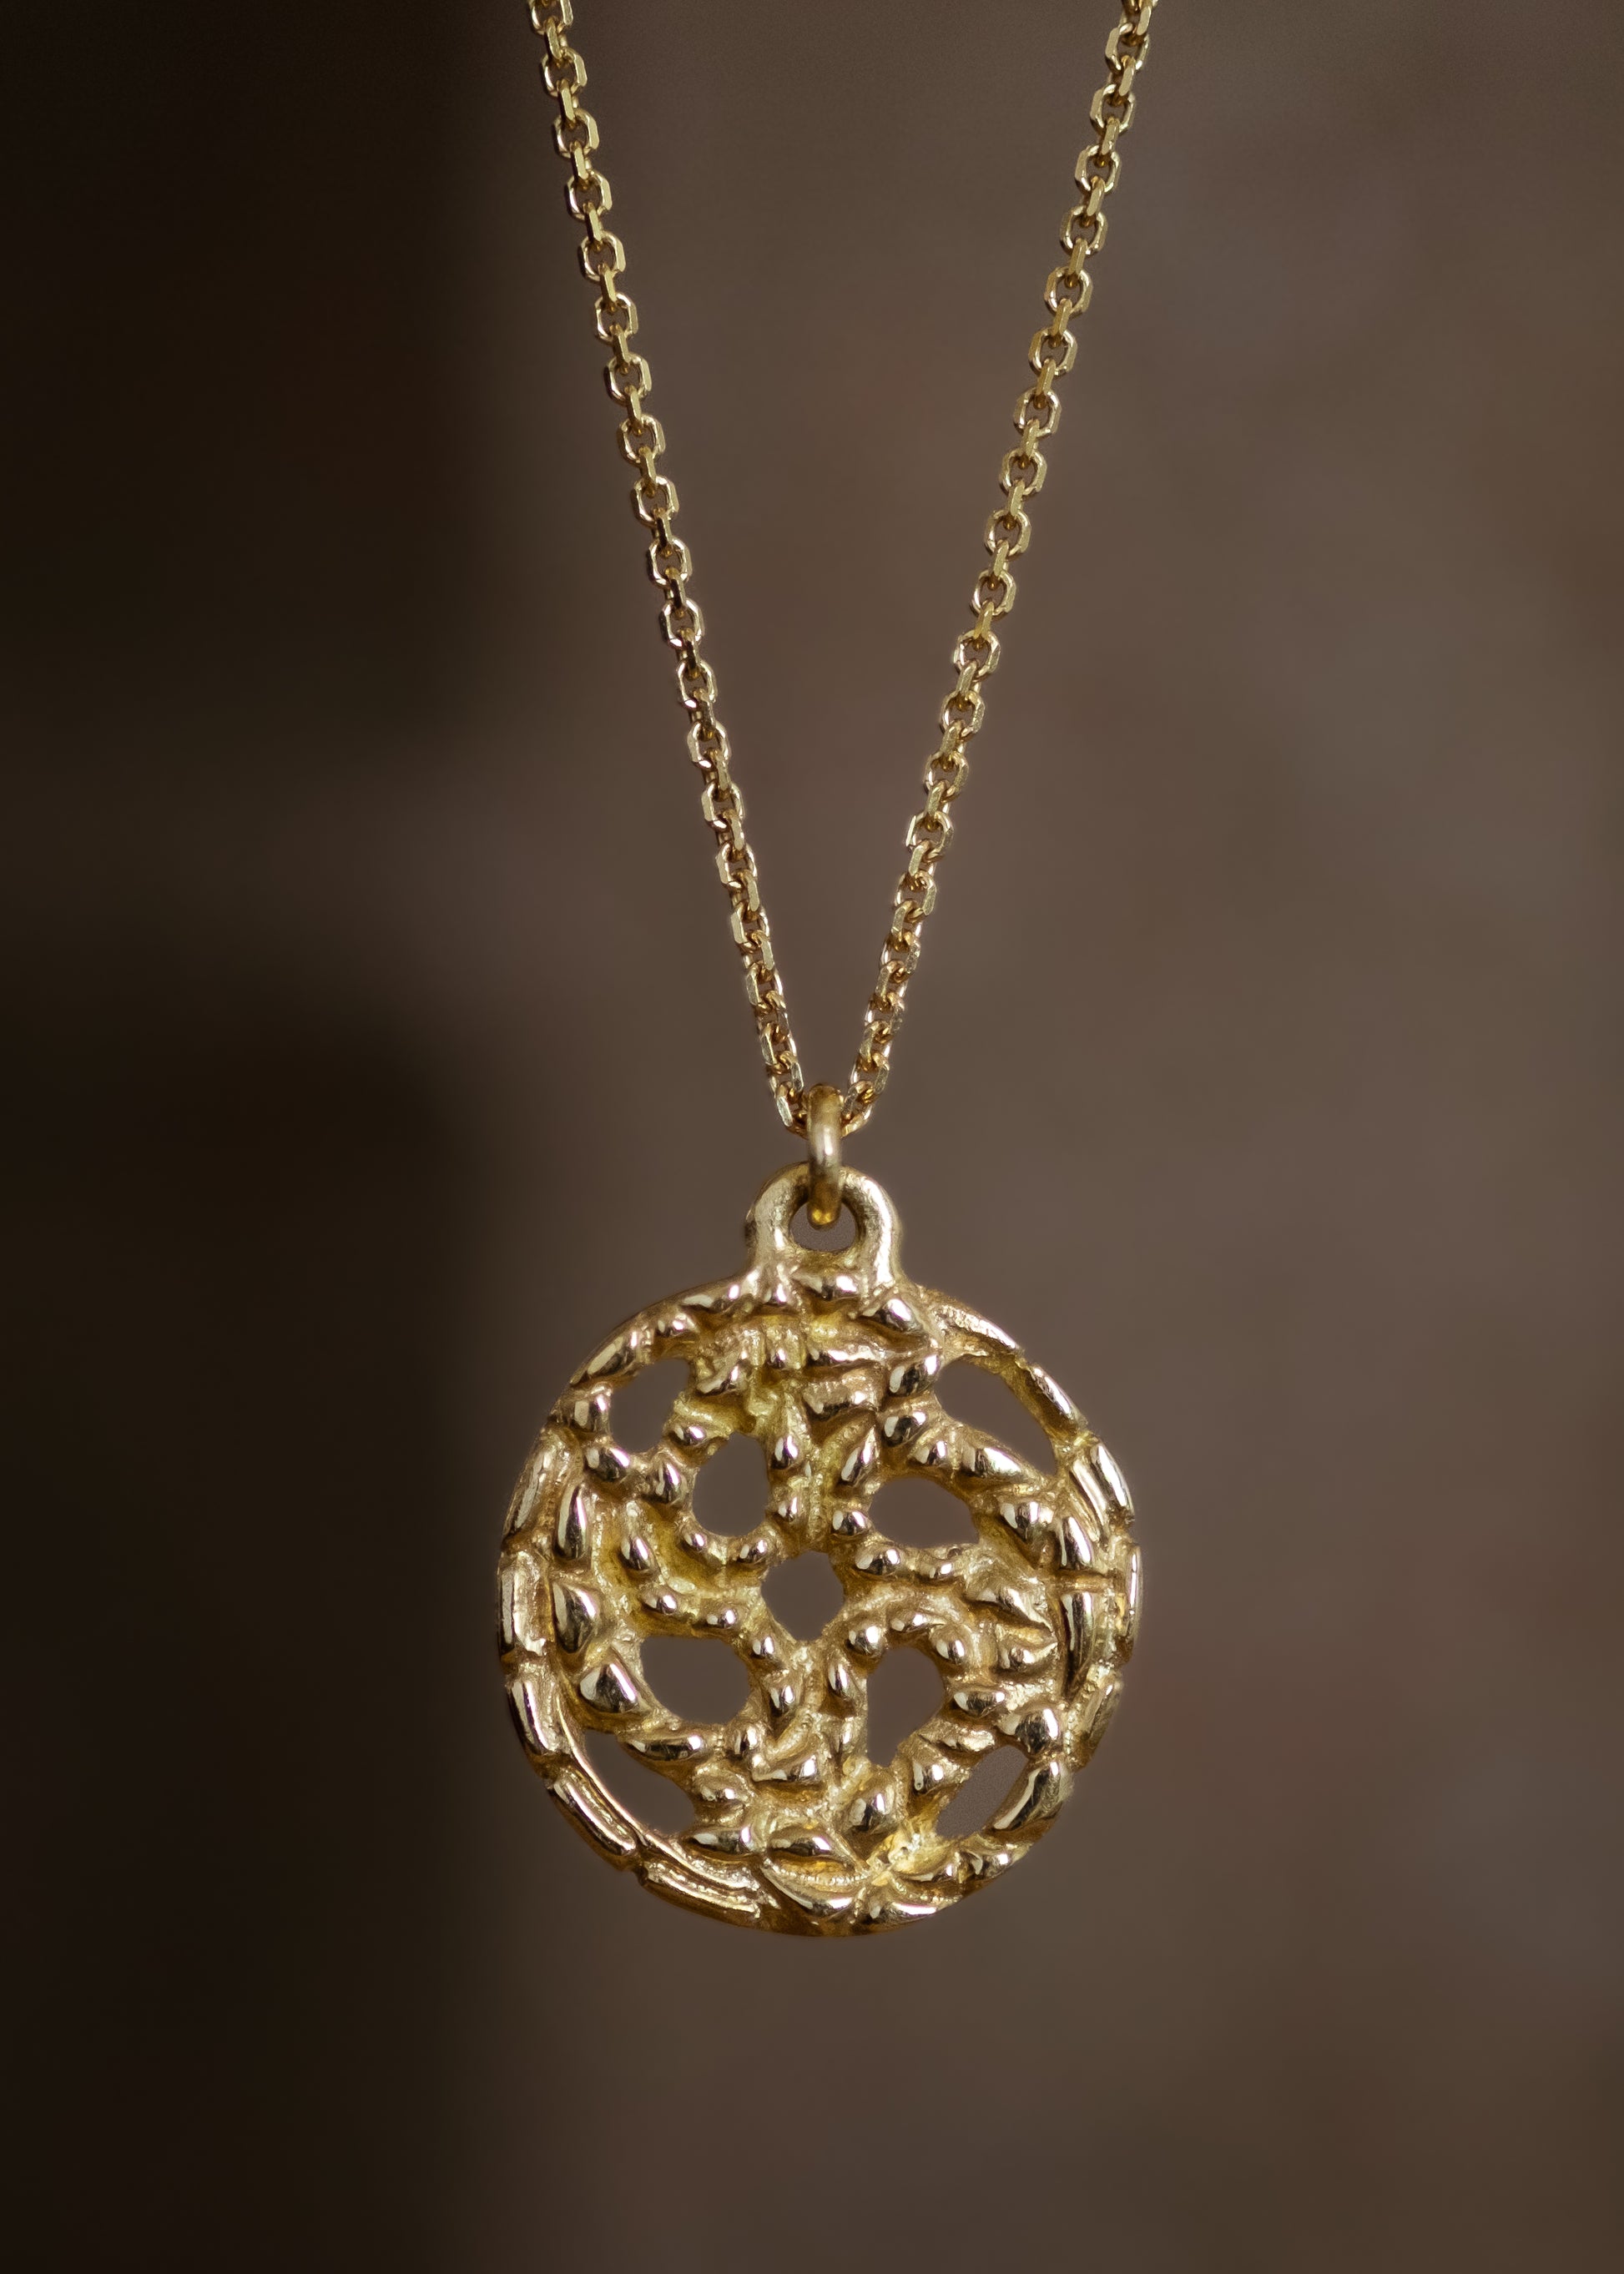 A passport to another world. With its intricate hand-carved texture and open-work design, the Token necklace calls to mind a lucky coin that opens the gate to where adventure lies, just beyond. 